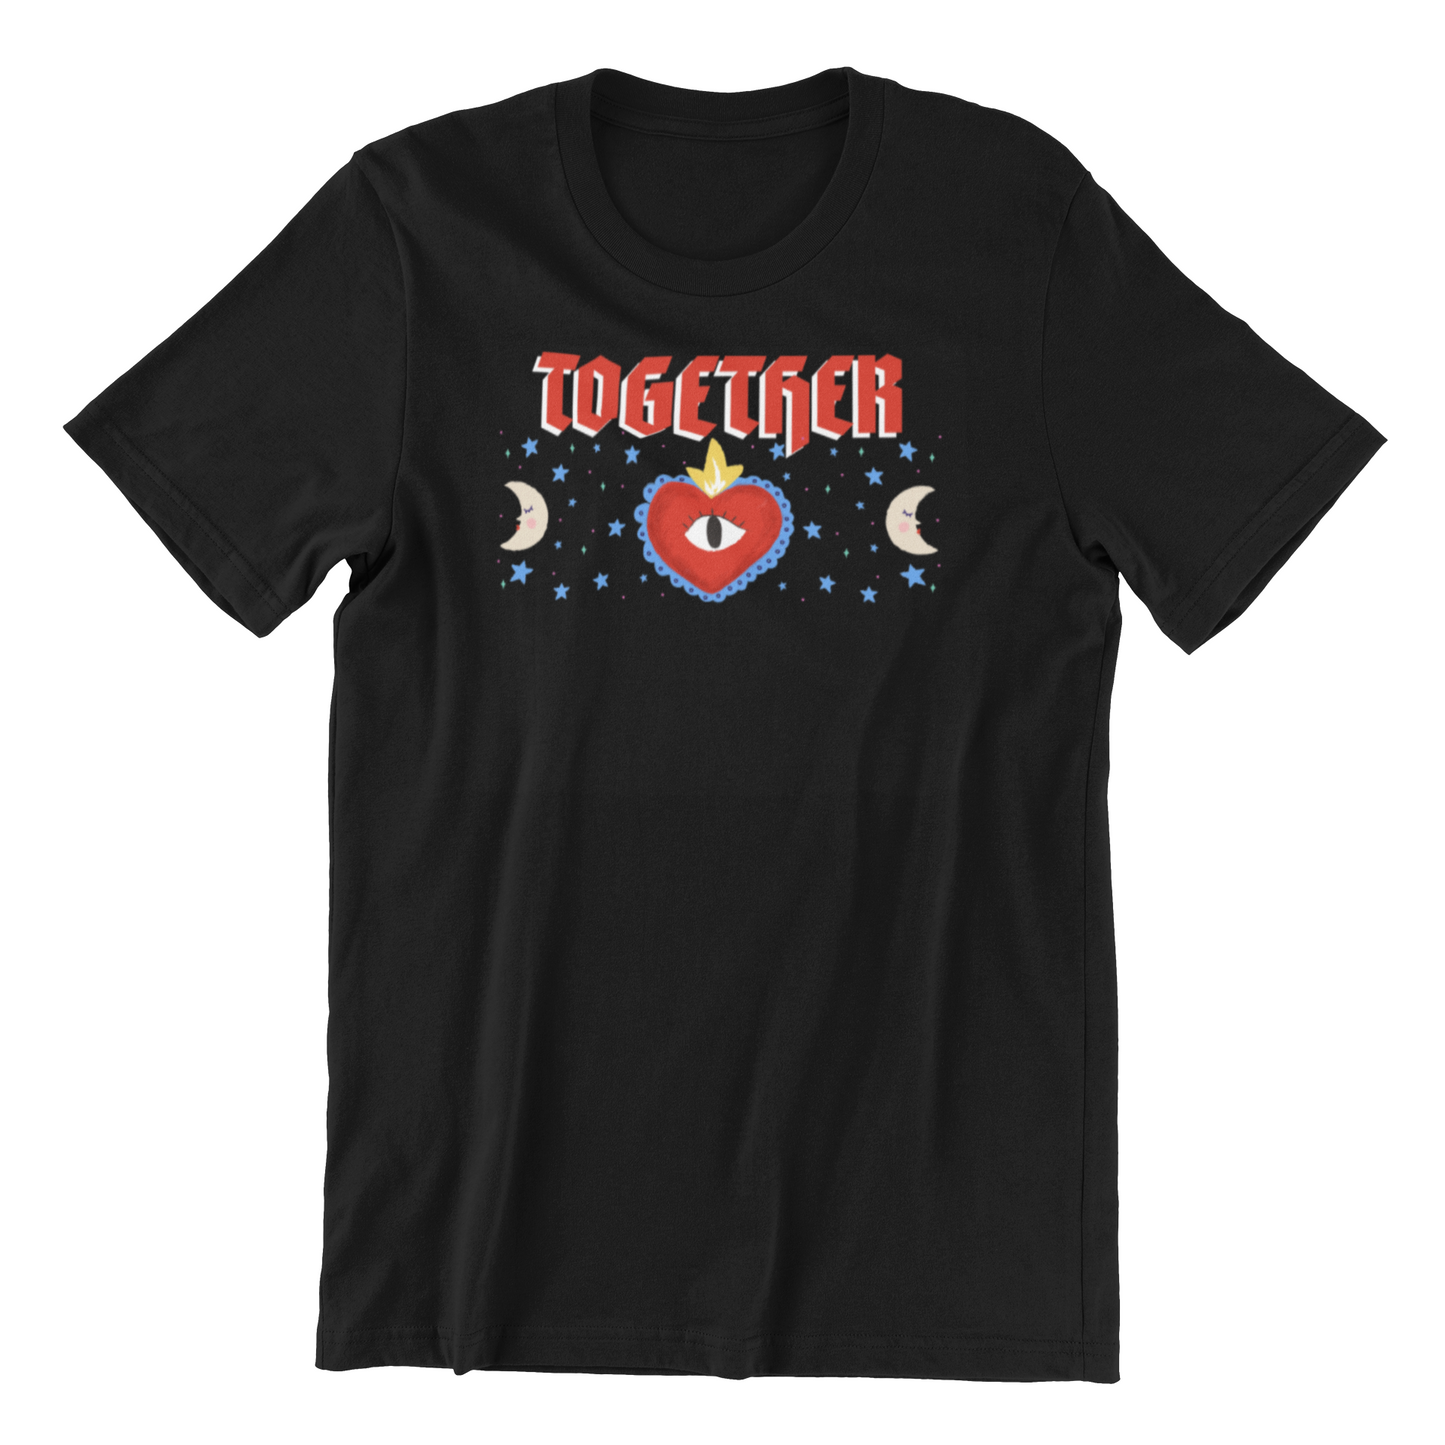 STRONGER TOGETHER couple t-shirt